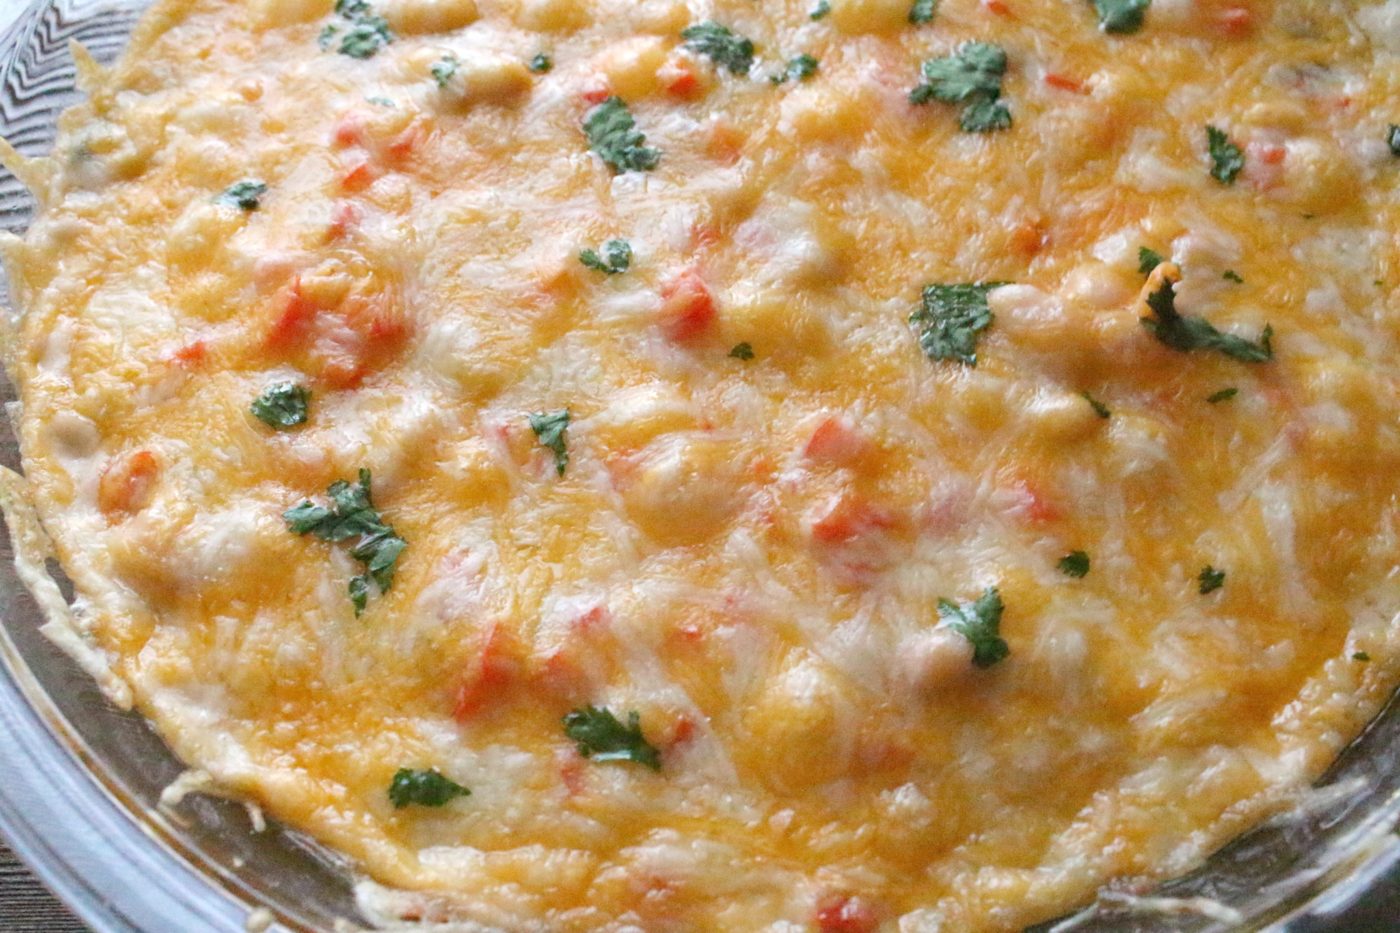 This chicken chili dip is cheesy, flavorful and perfect for a party.